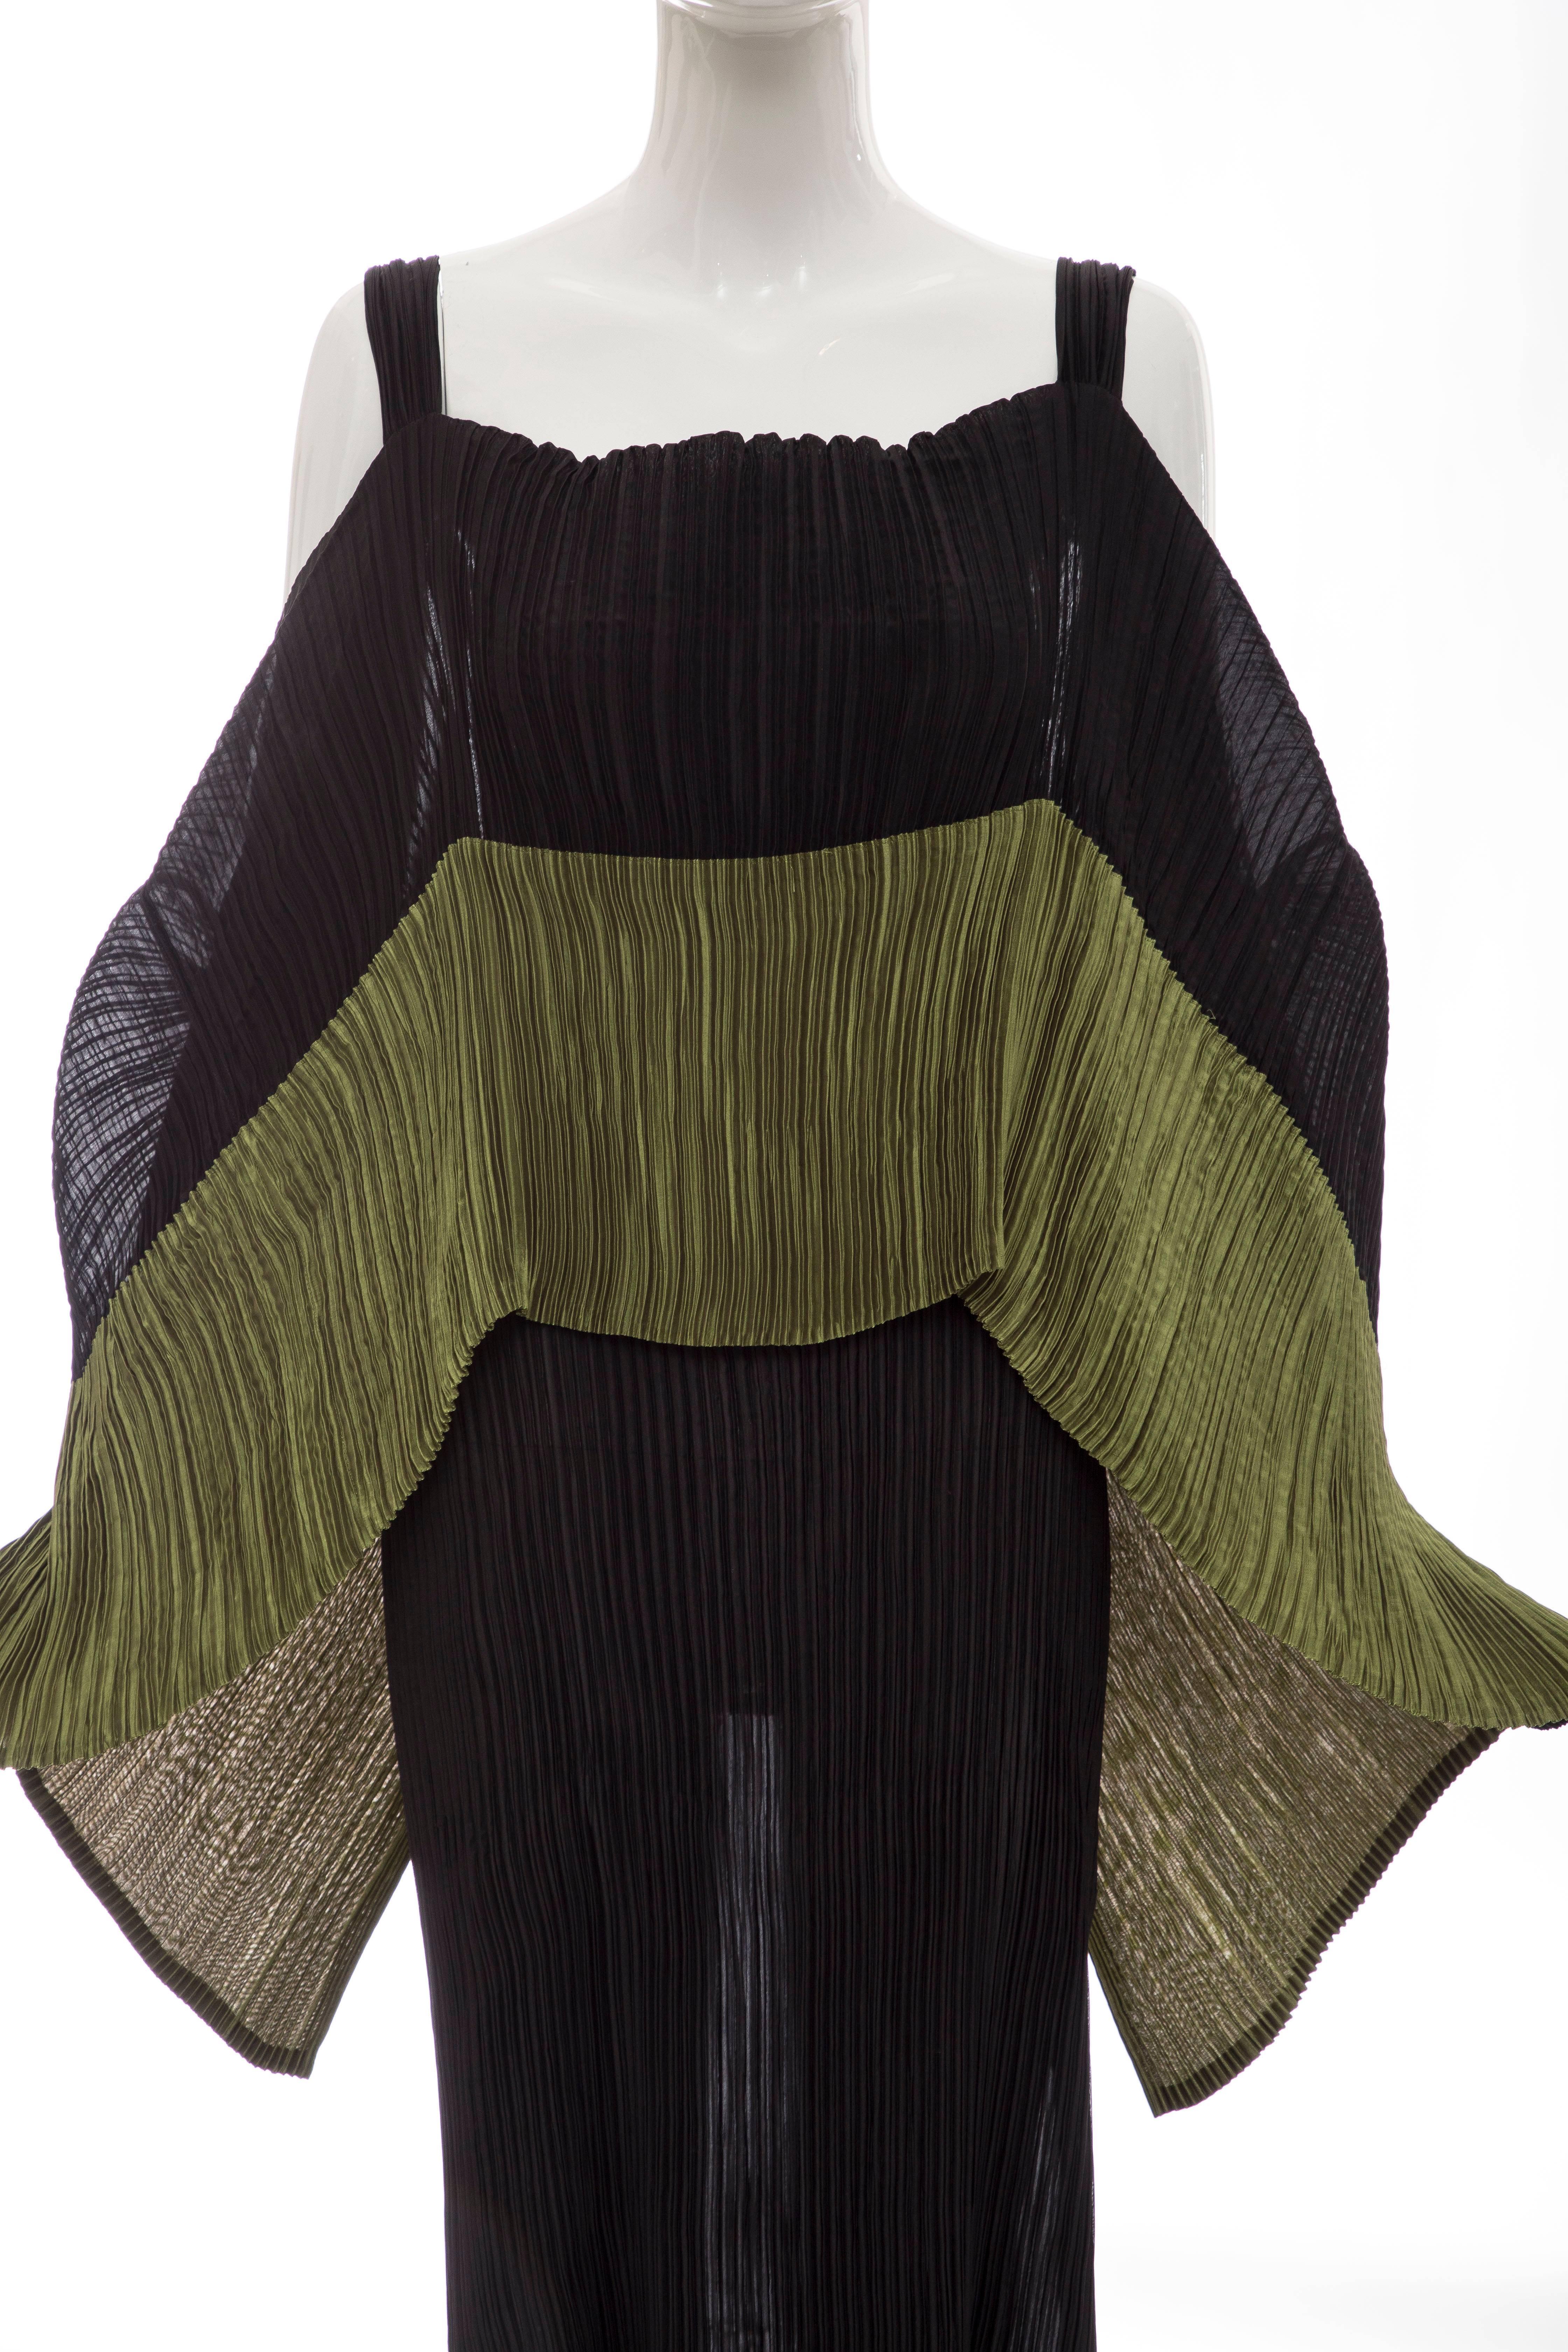 Issey Miyake Black Pleated Dress With Olive Green Panel At Bodice, Circa 1990s 2